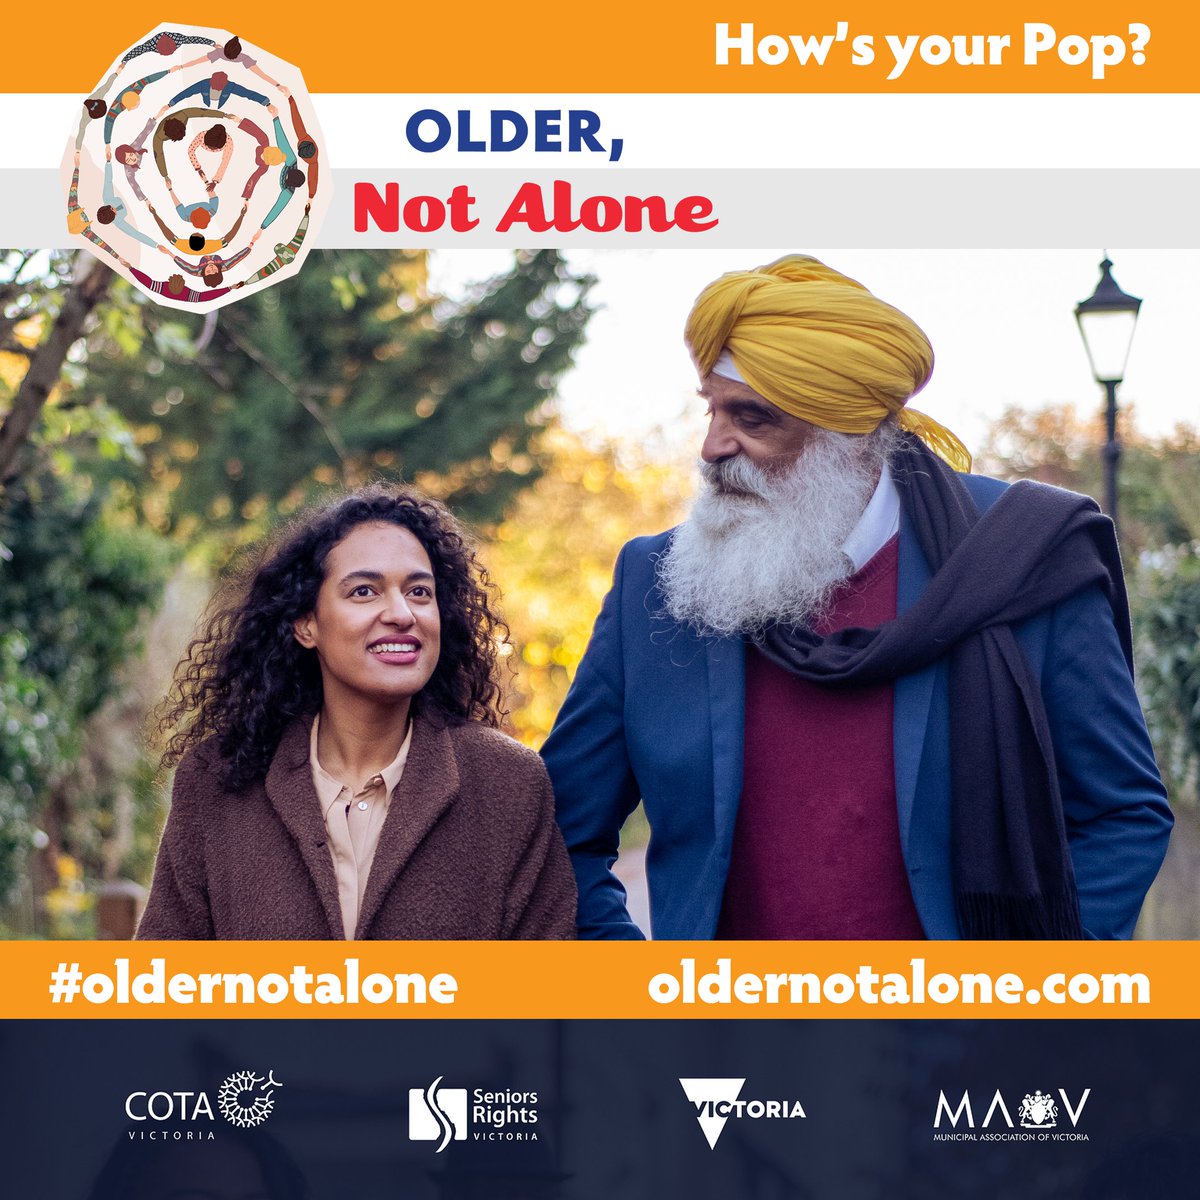 No matter your query, our #COTAWISE information line is at your disposal, designed to make older people feel WISE – Welcome, Included, Supported and Empowered. Call 1300 135 090 or visit the COTA WISE website here: cotavic.org.au/information/wi… #OlderNotAlone